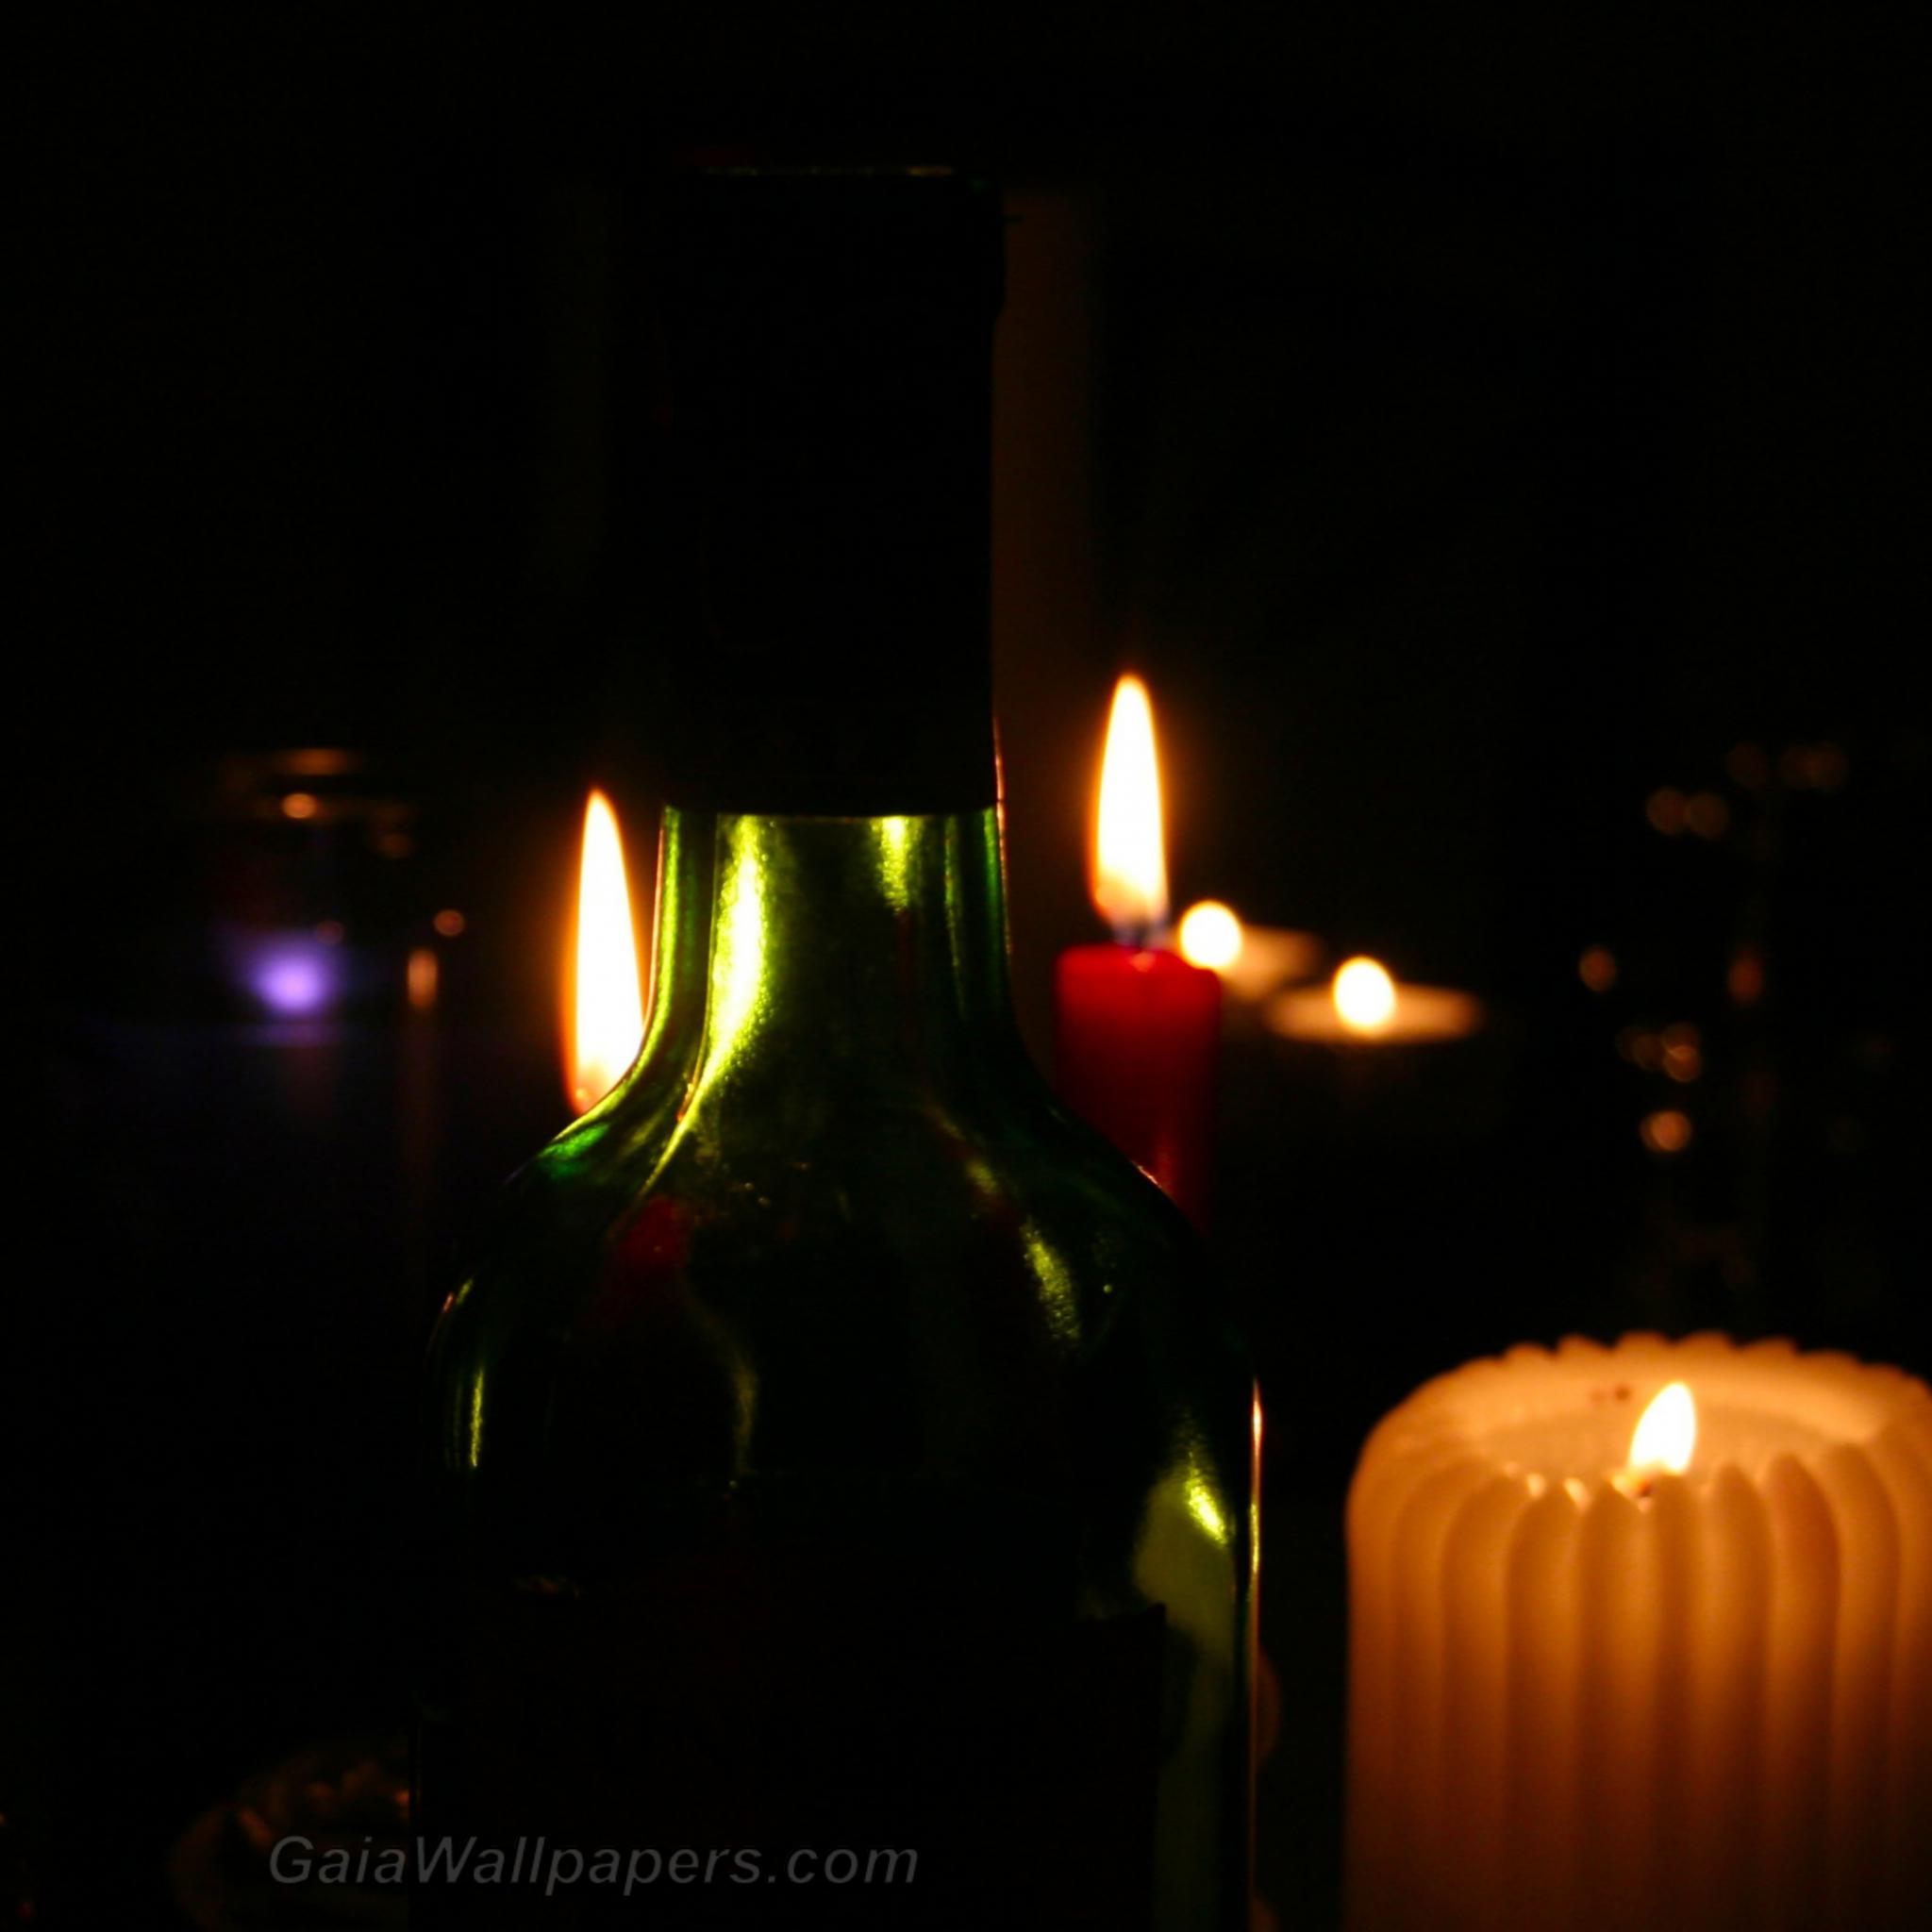 Candles and bottles - Free desktop wallpapers